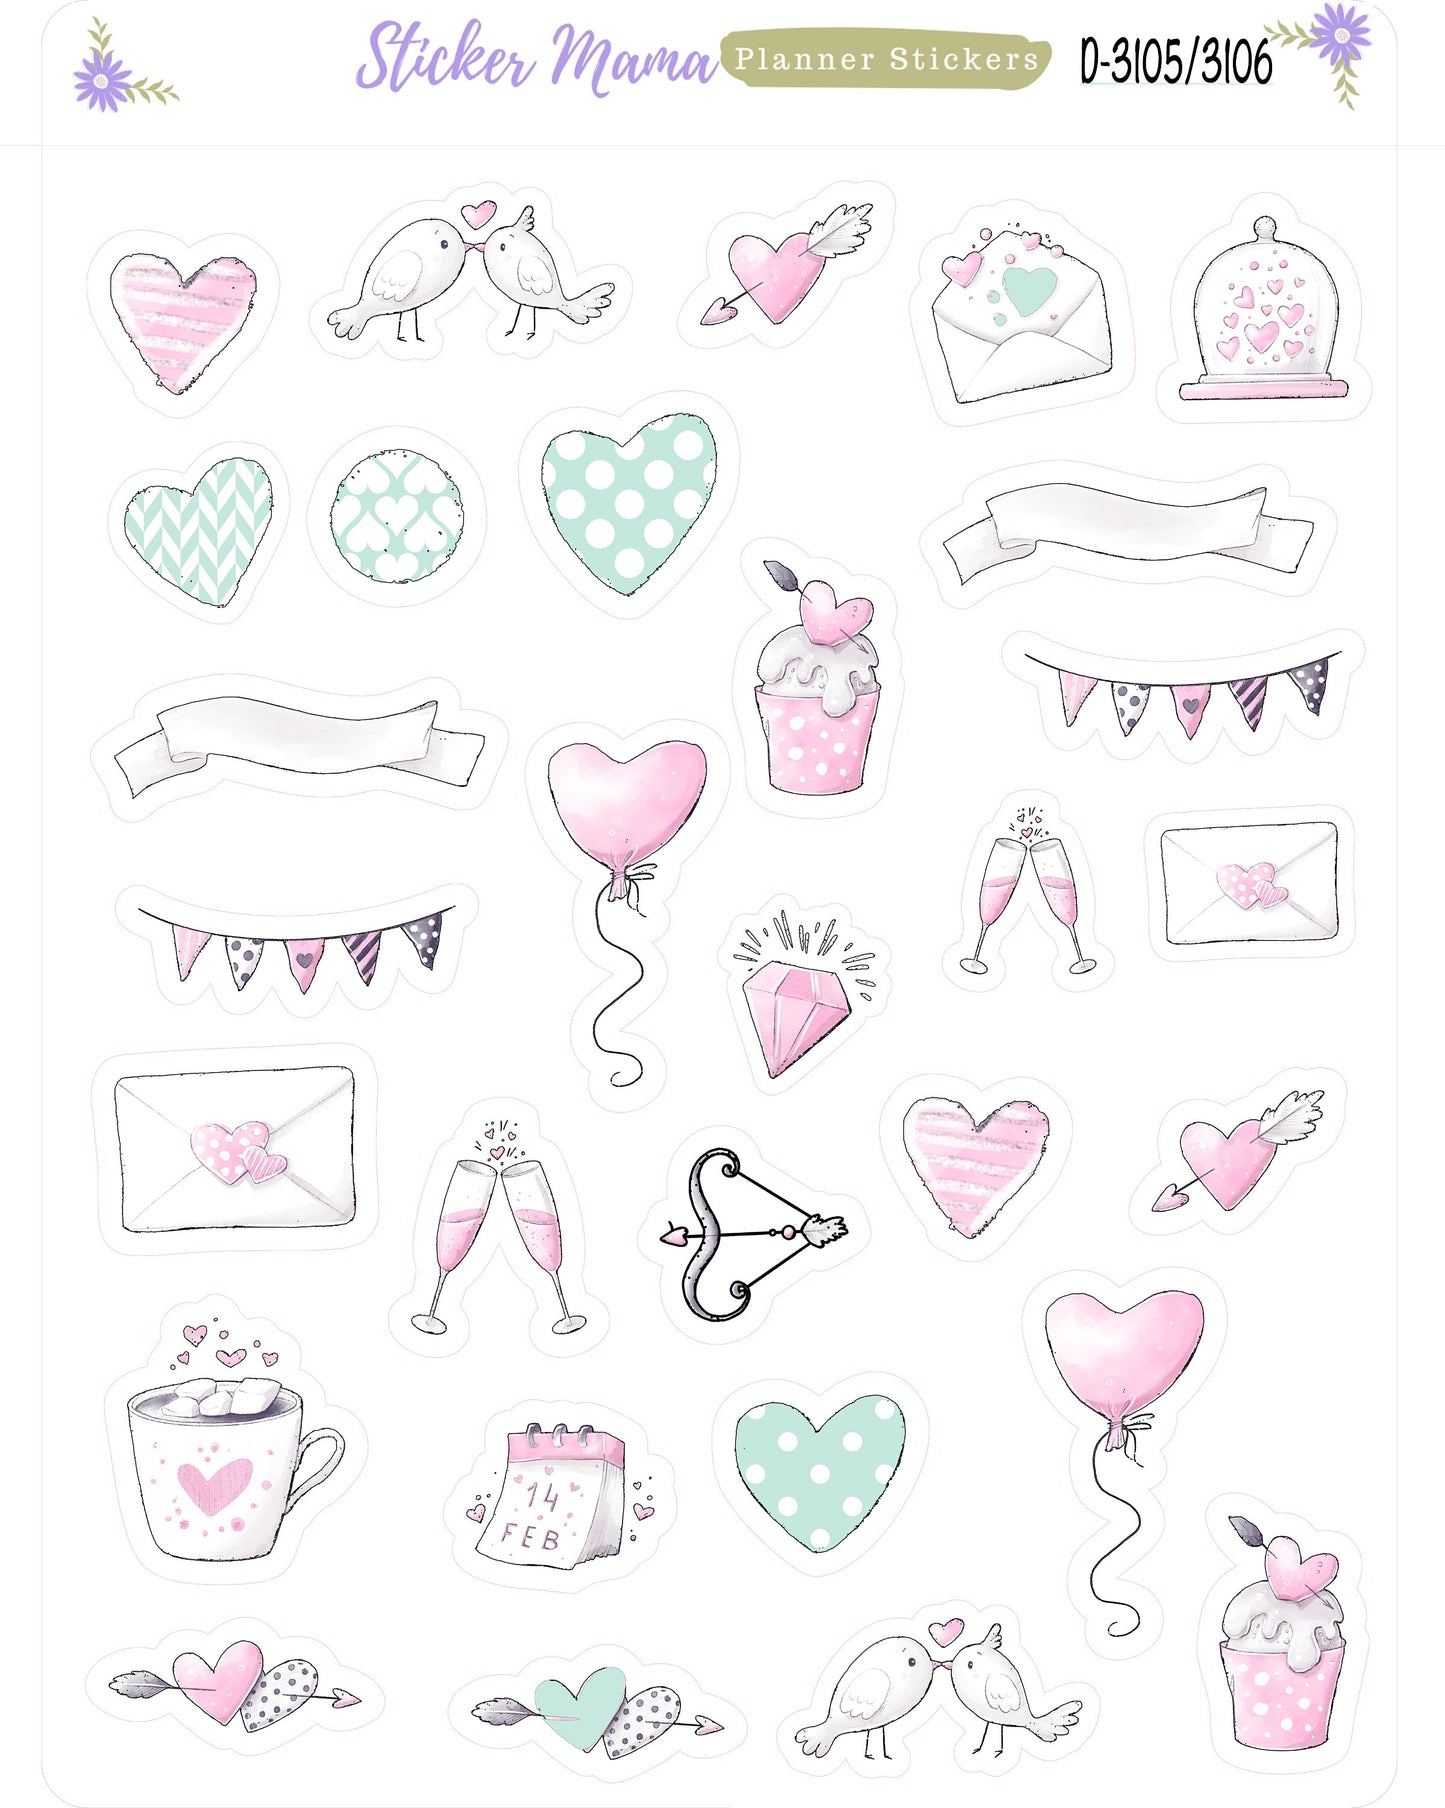 SIMPLE KIT  || #3105 || Hello, Love! || Any Kind Planner || Planner Stickers || Planner Stickers